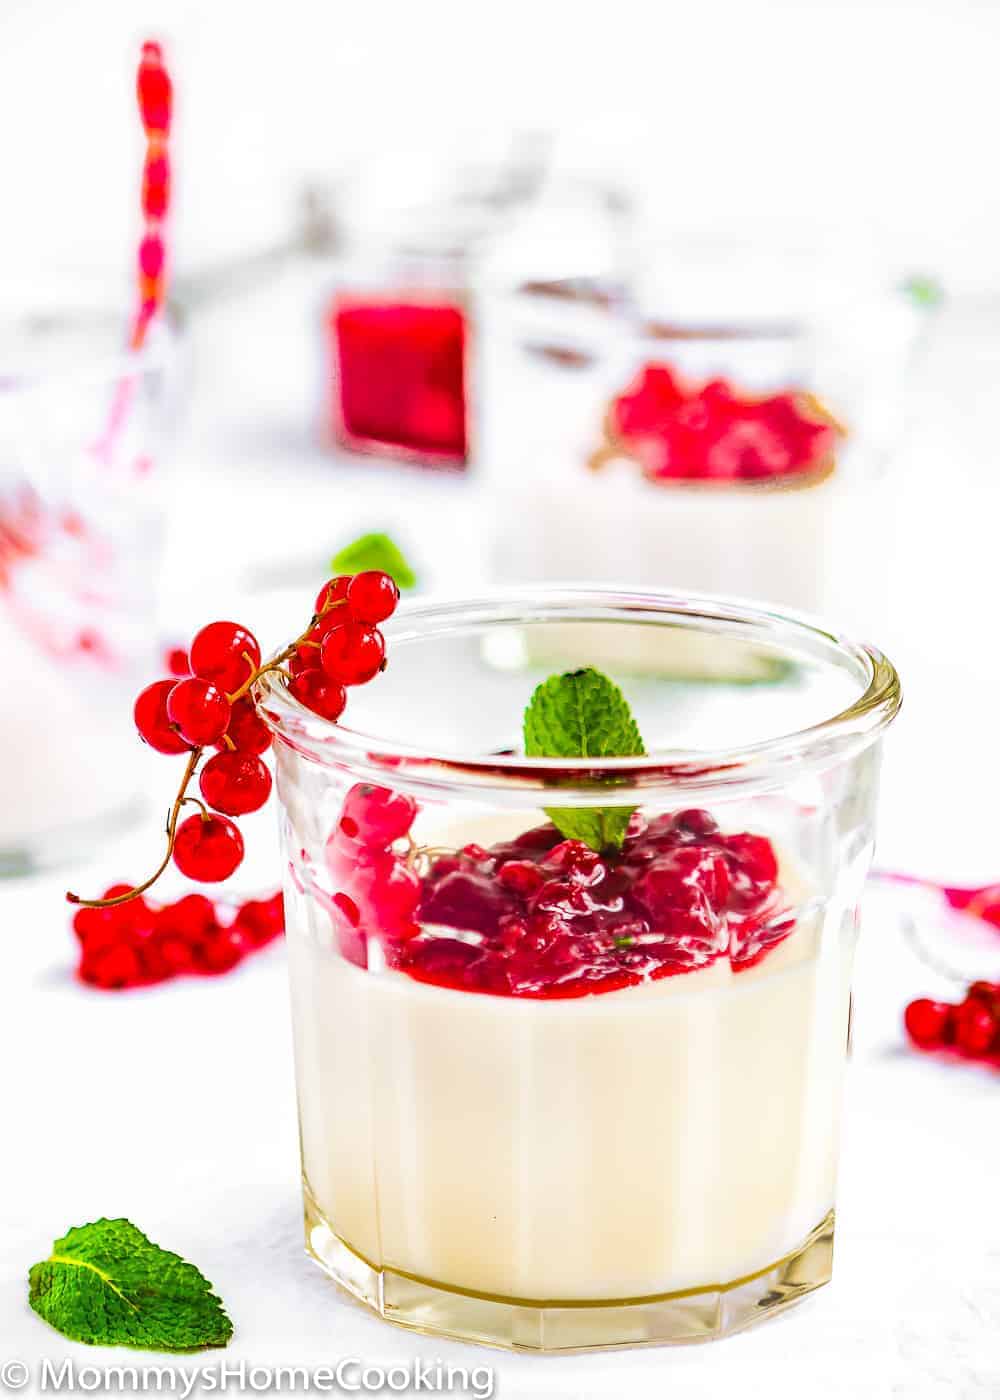 White Chocolate Panna Cotta with Red Currant Sauce